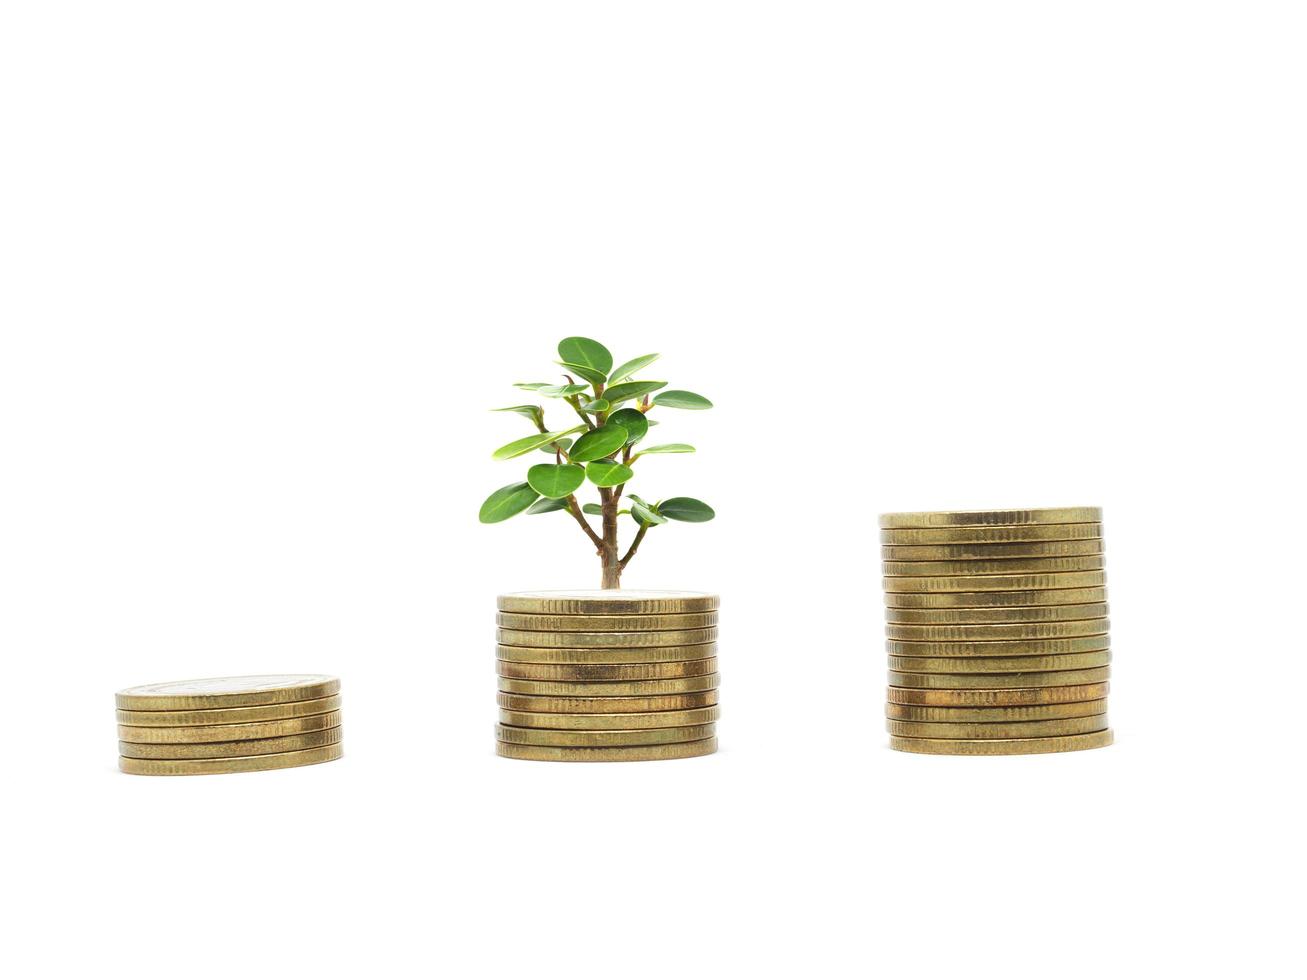 Gold coins growing up with small tree green leaf on white isolated business economic concept photo